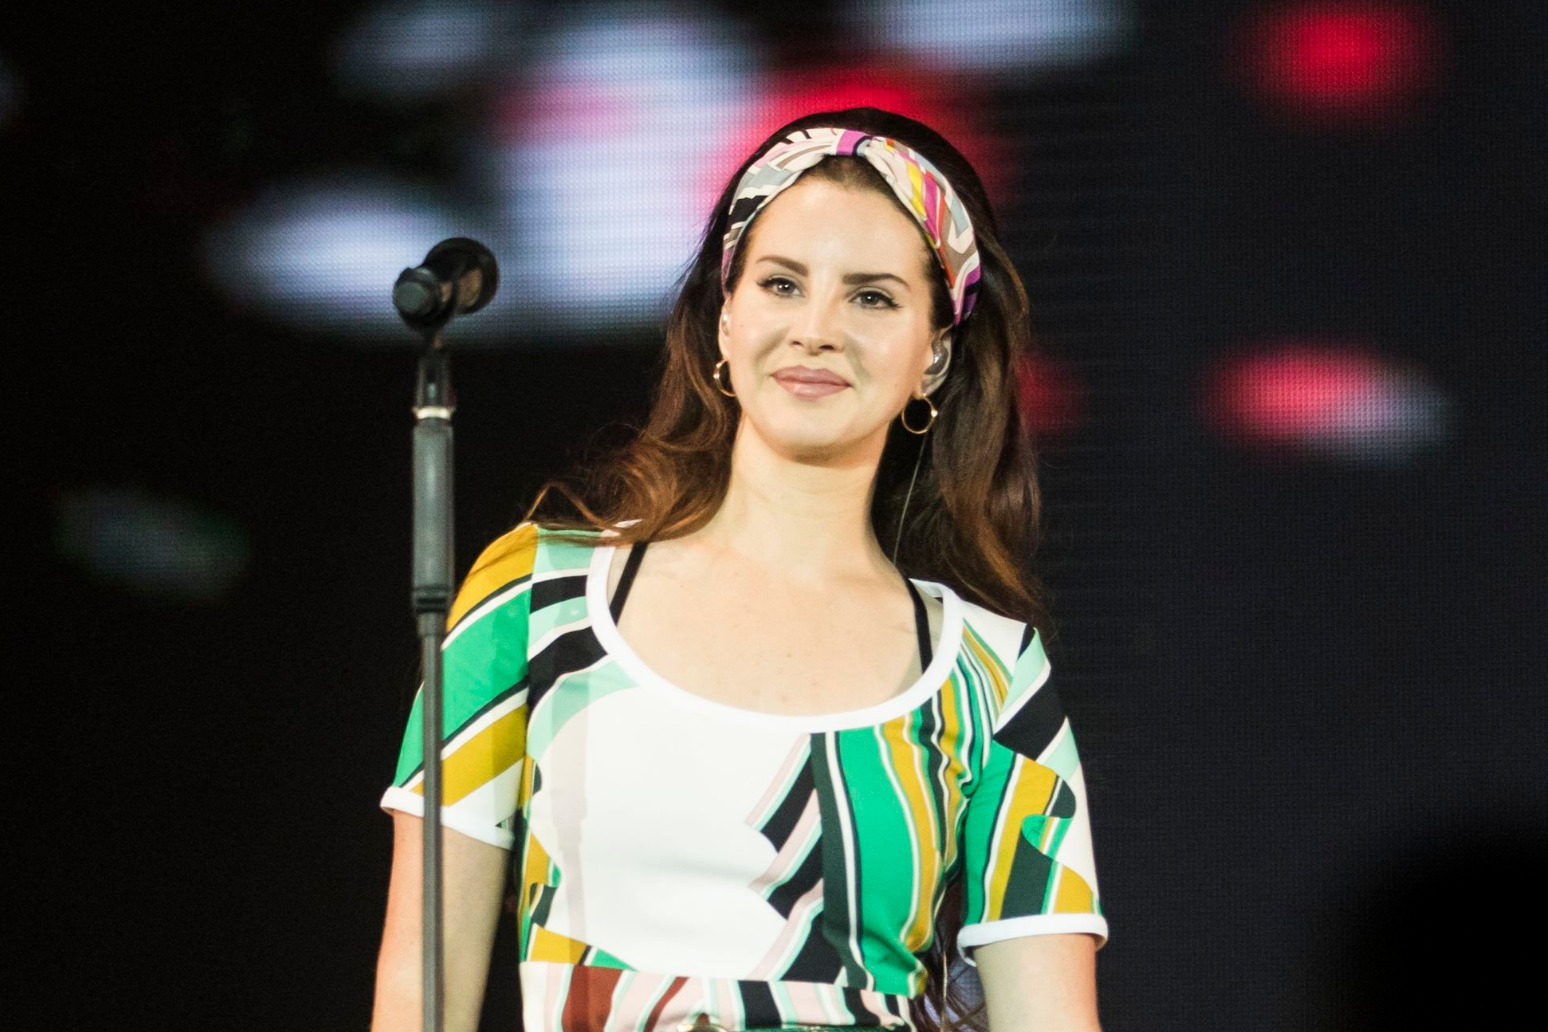 Coachella to kick off with first headline performer Lana Del Rey 